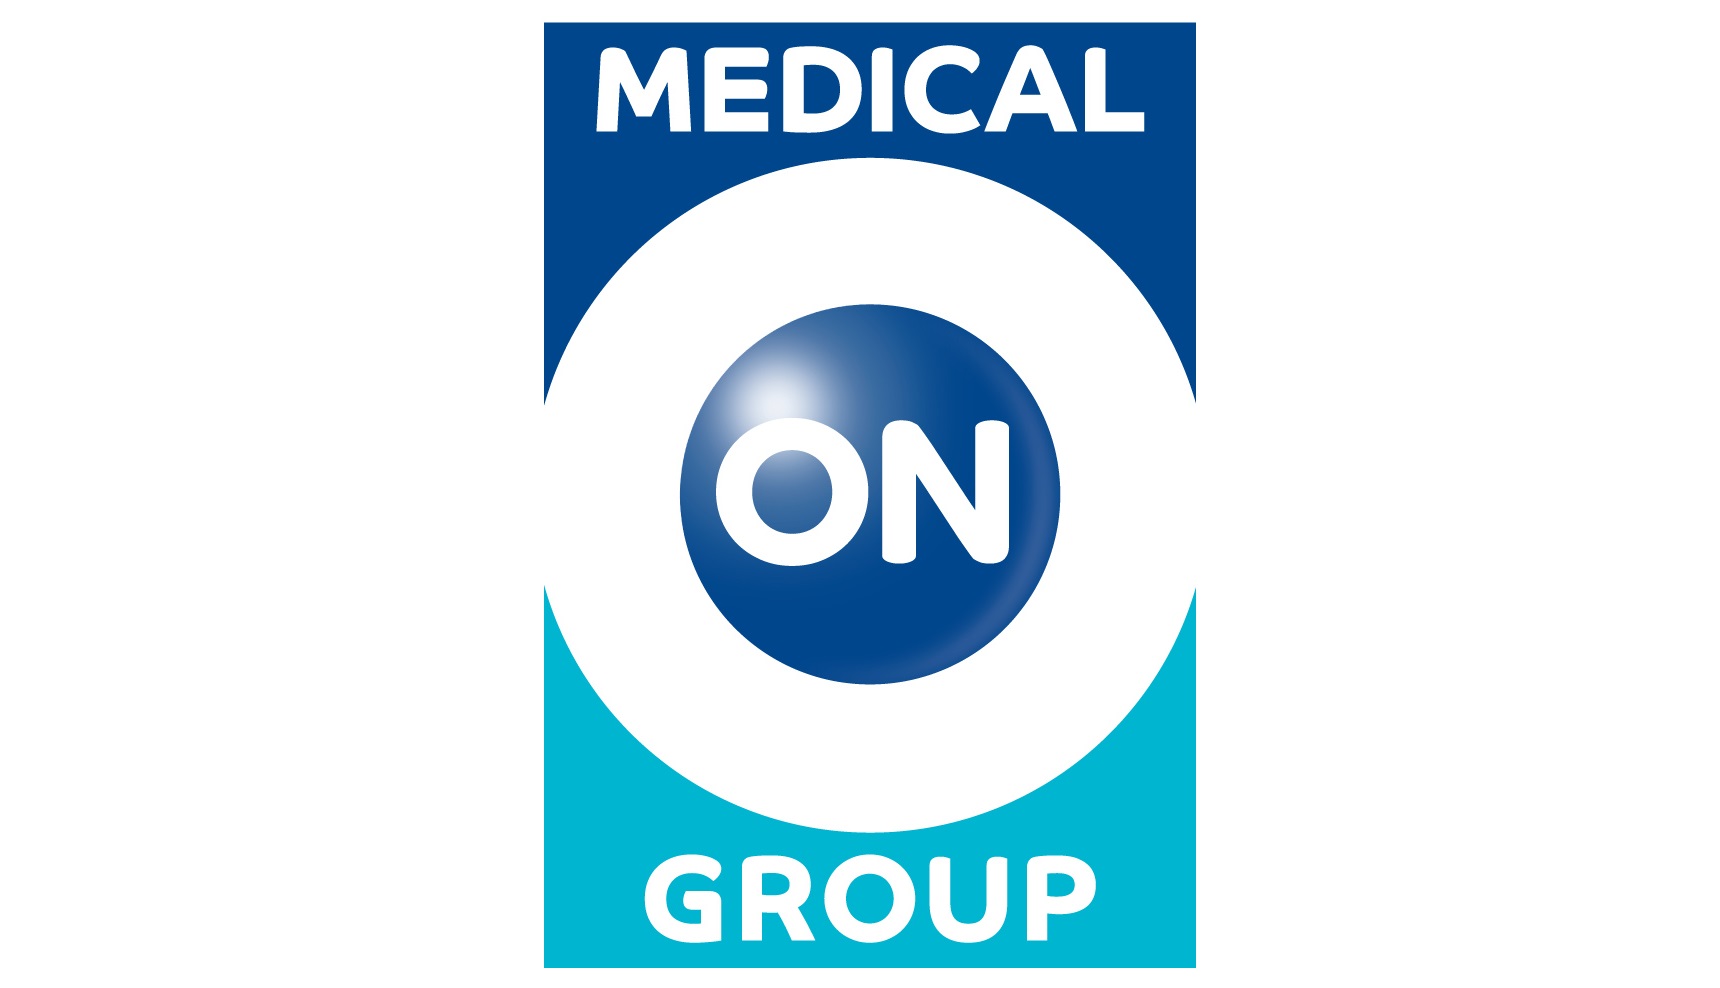  MEDICAL ON GROUP